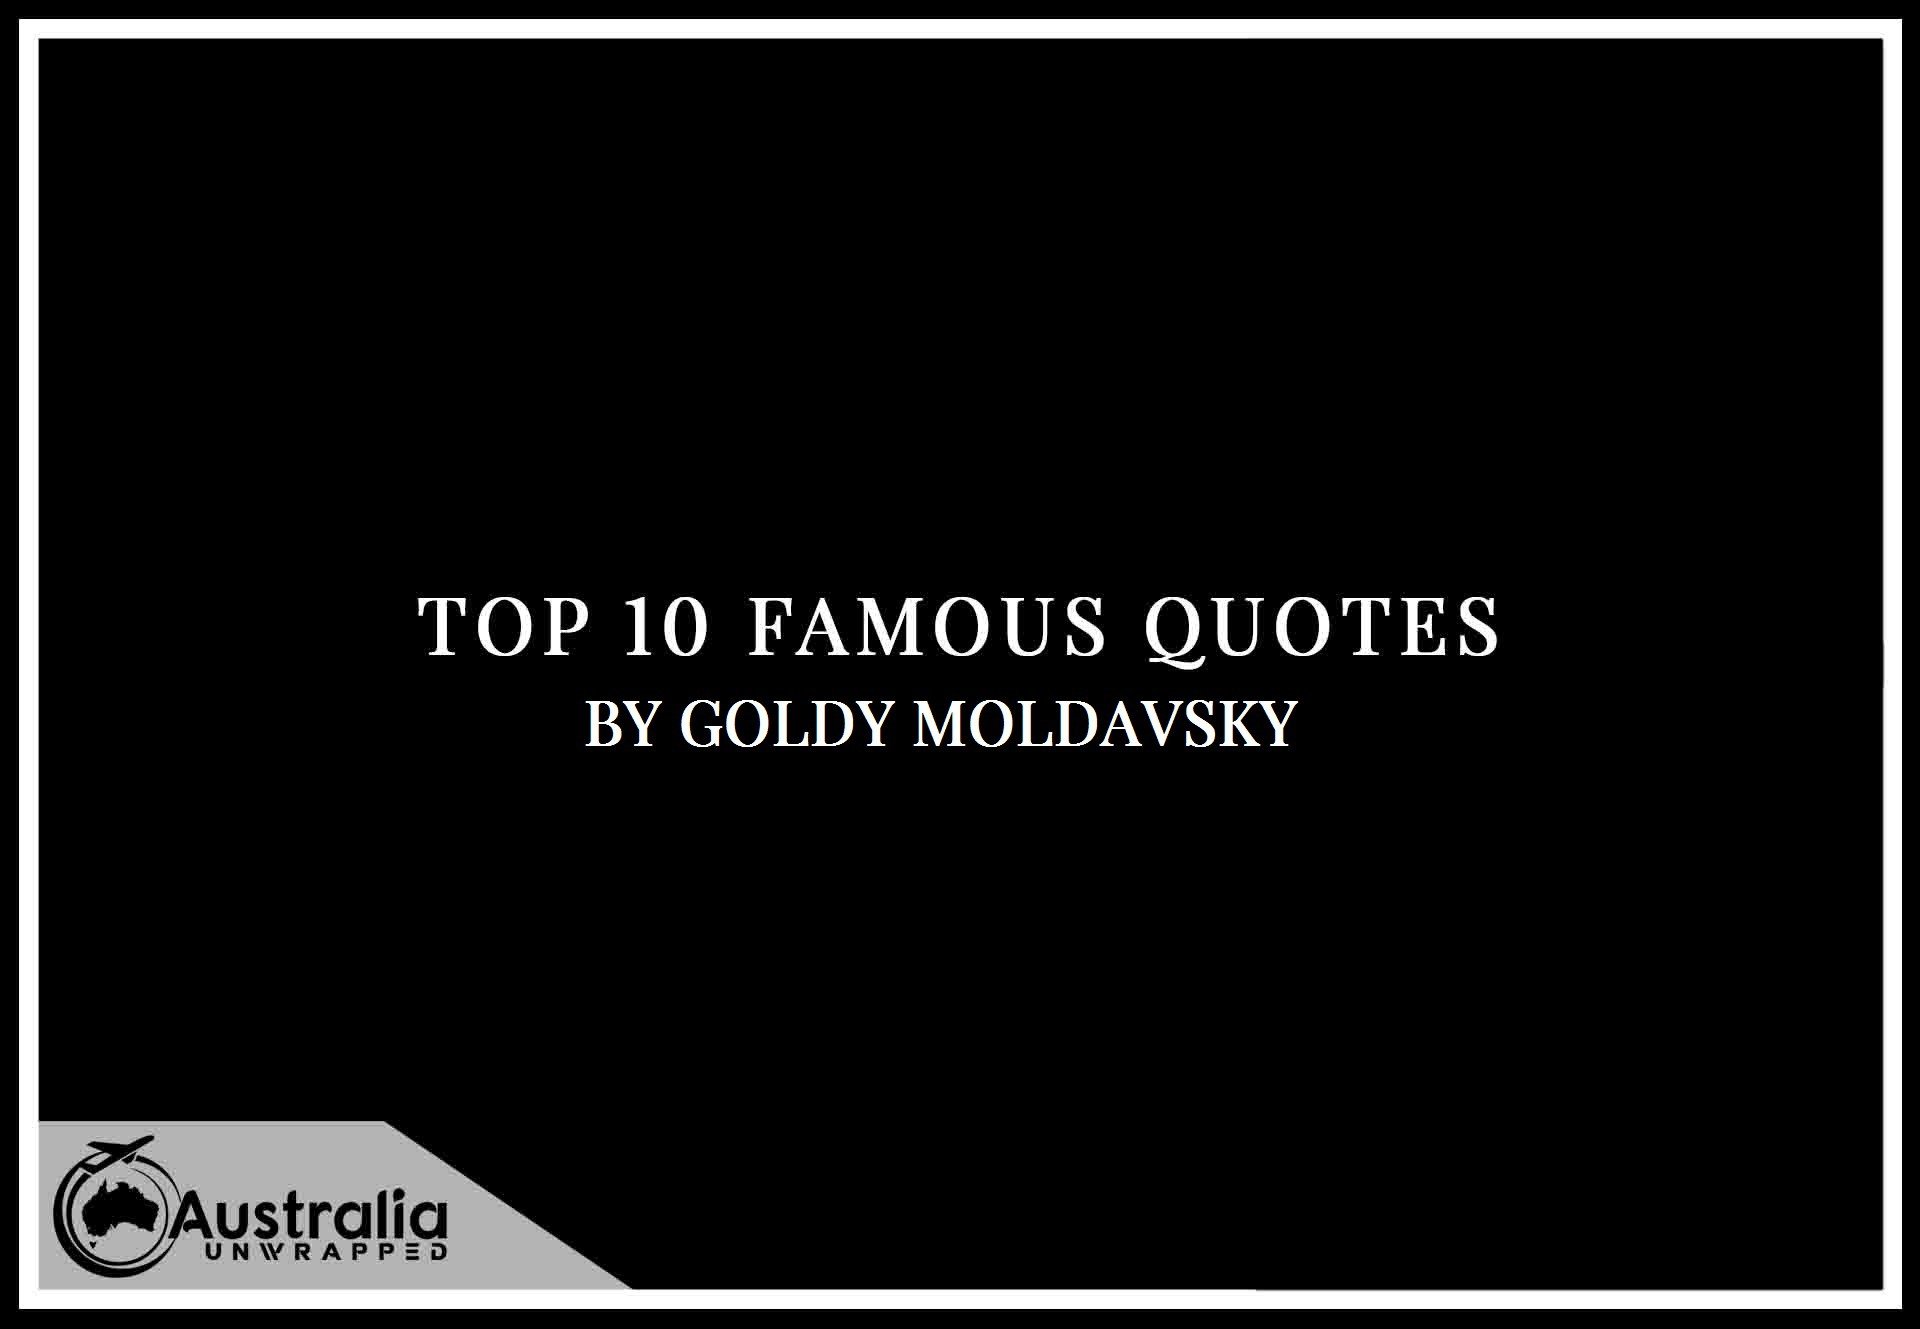 Goldy Moldavsky’s Top 10 Popular and Famous Quotes